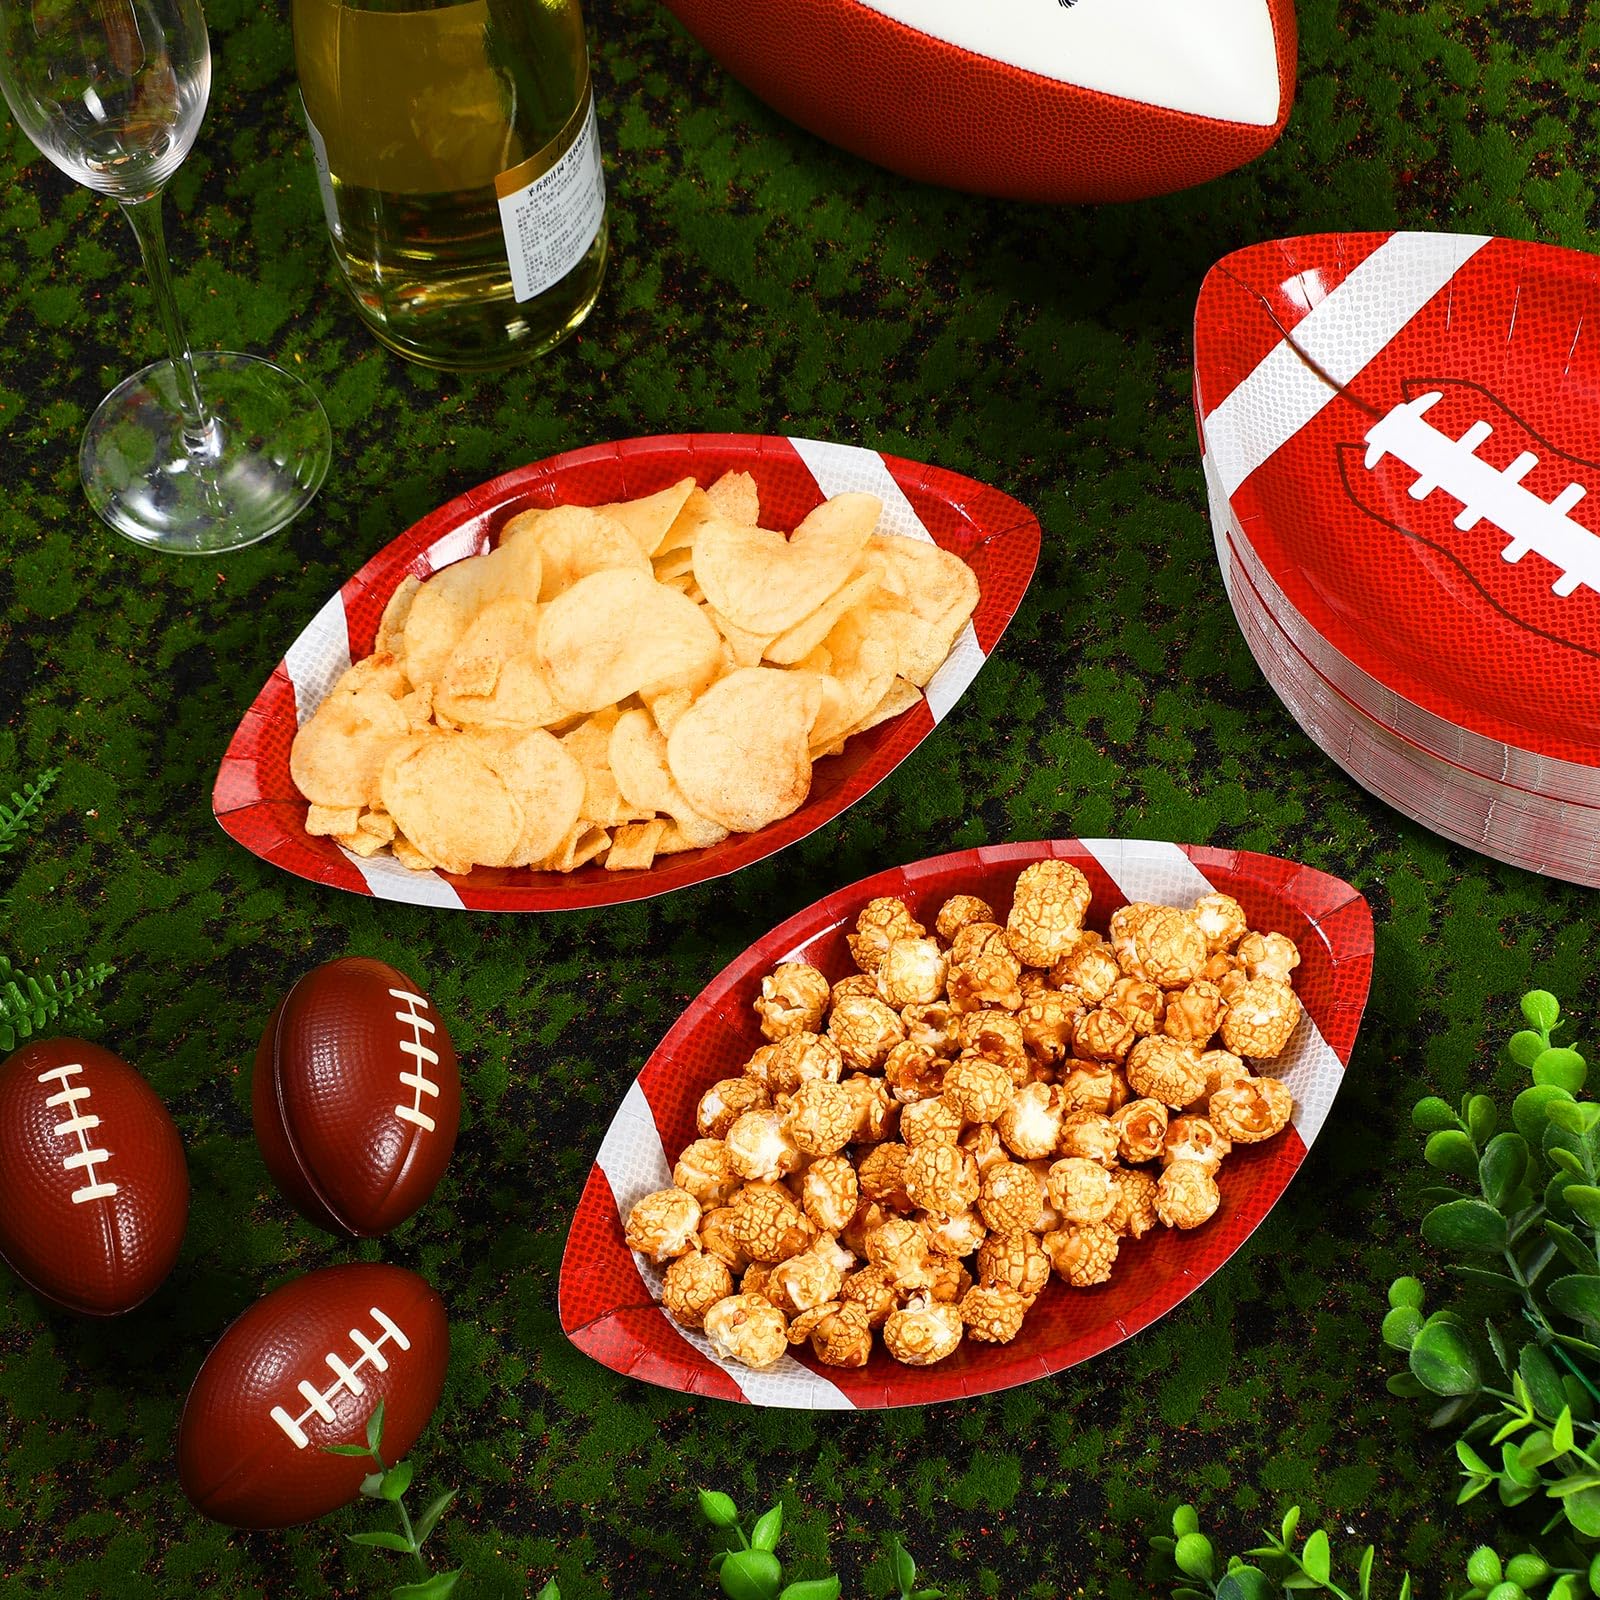 Zubebe 200 Pcs Football Paper Plates Disposable Football Party Supplies Snack Sports Plates Football Birthday Party Favors Disposable Football Serving Trays for Game Day Sports Event Tailgate Party